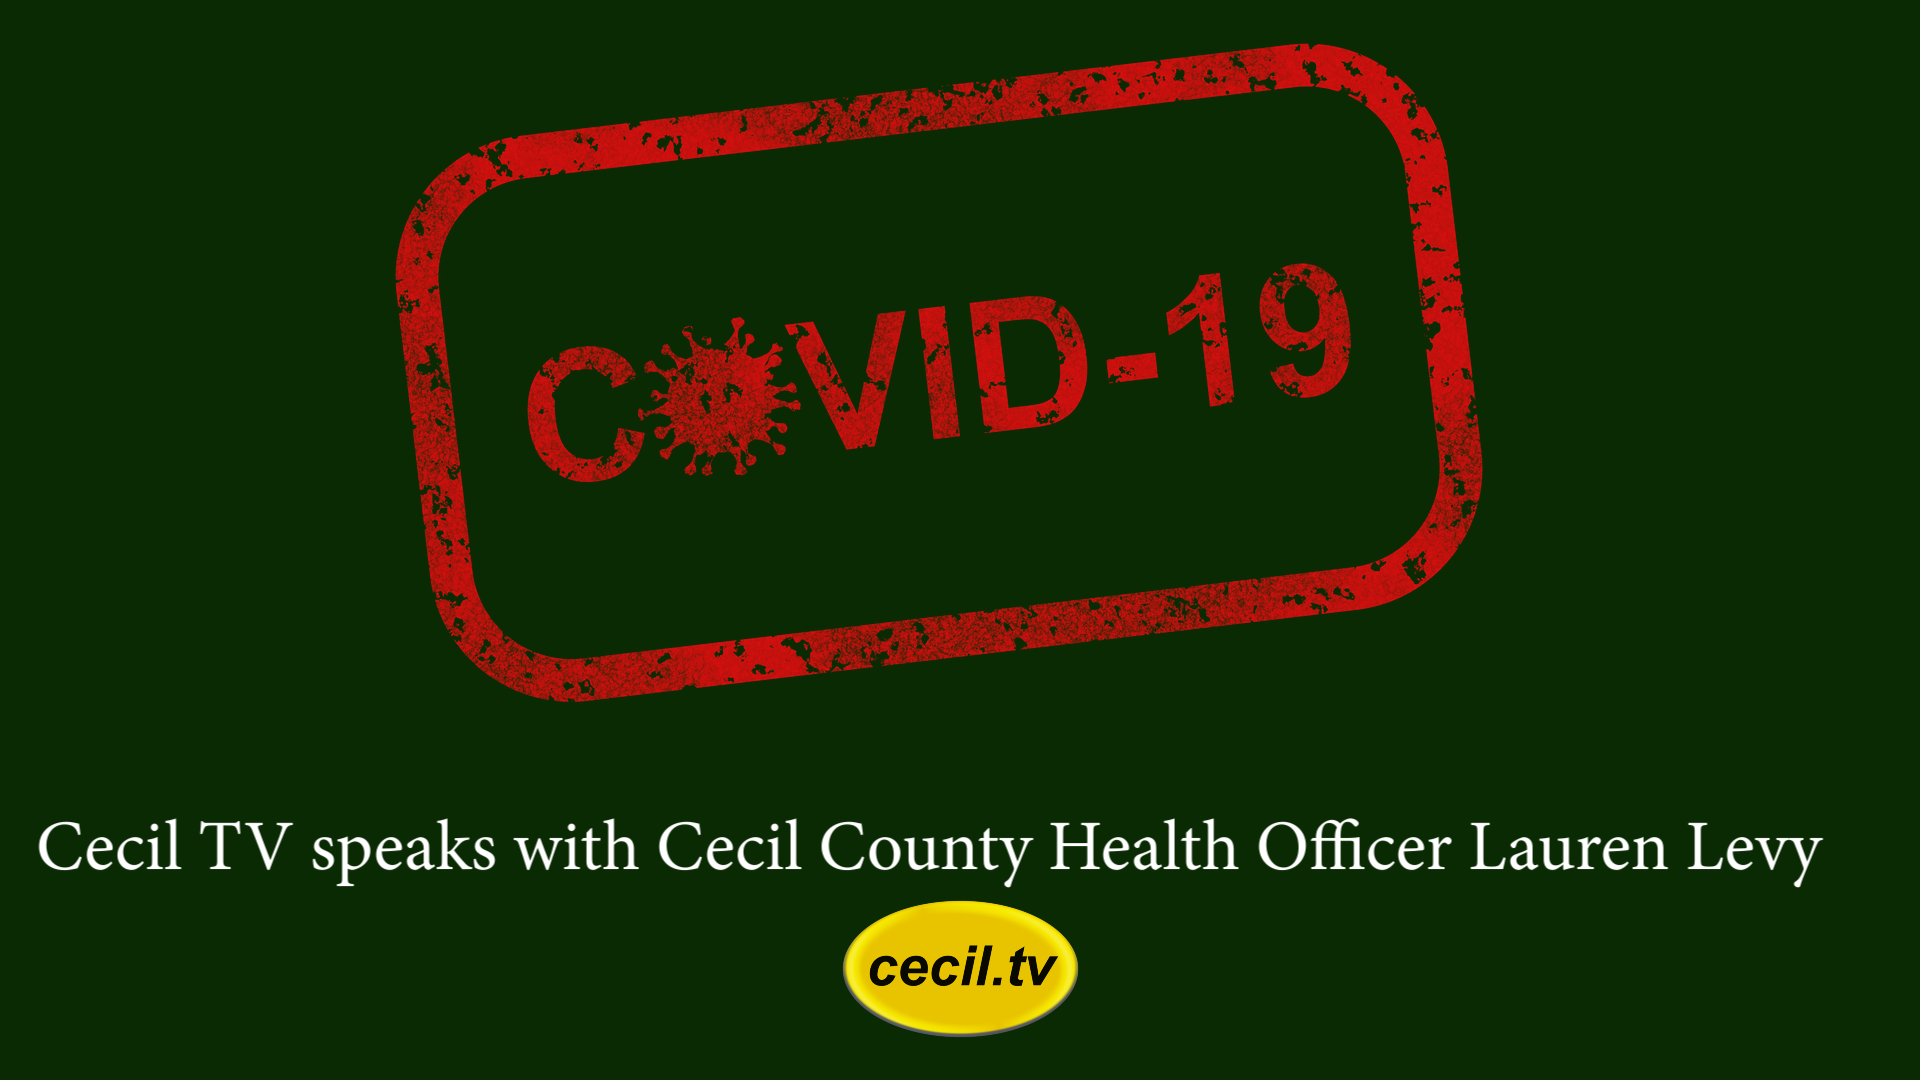 Cecil TV speaks with Cecil County's Health Officer Lauren Levy